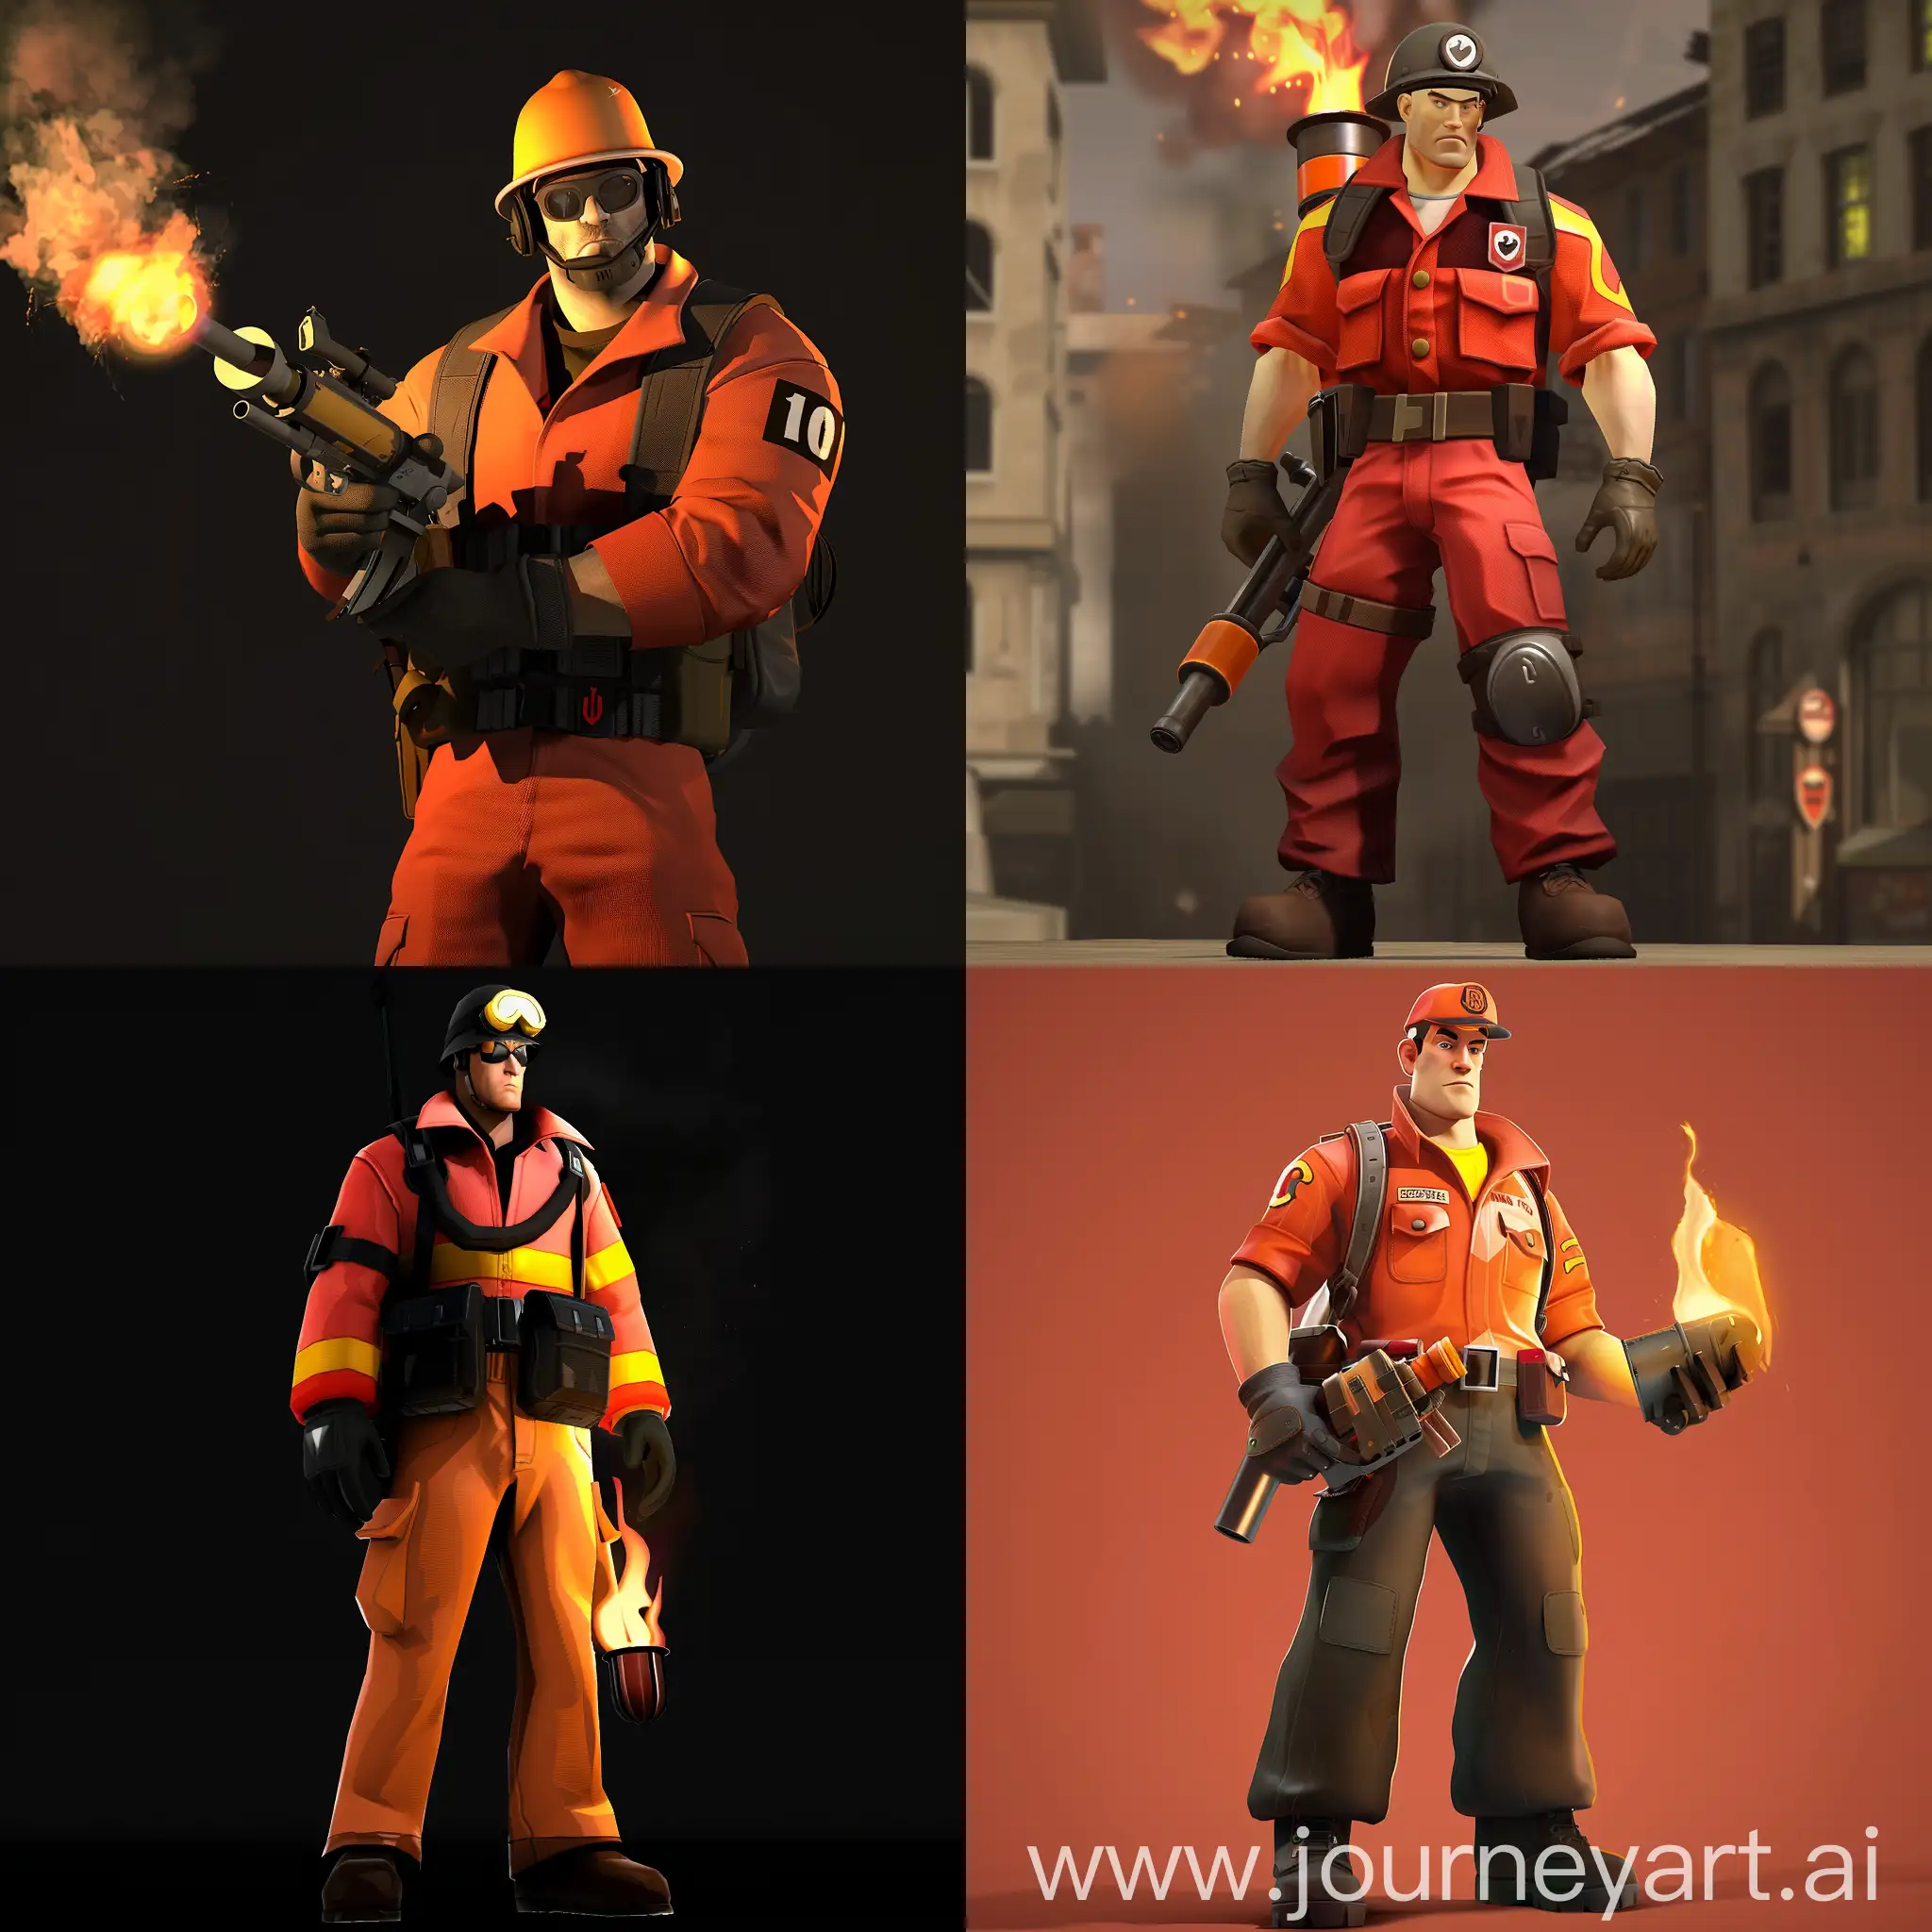 Pyro from Team Fortress 2